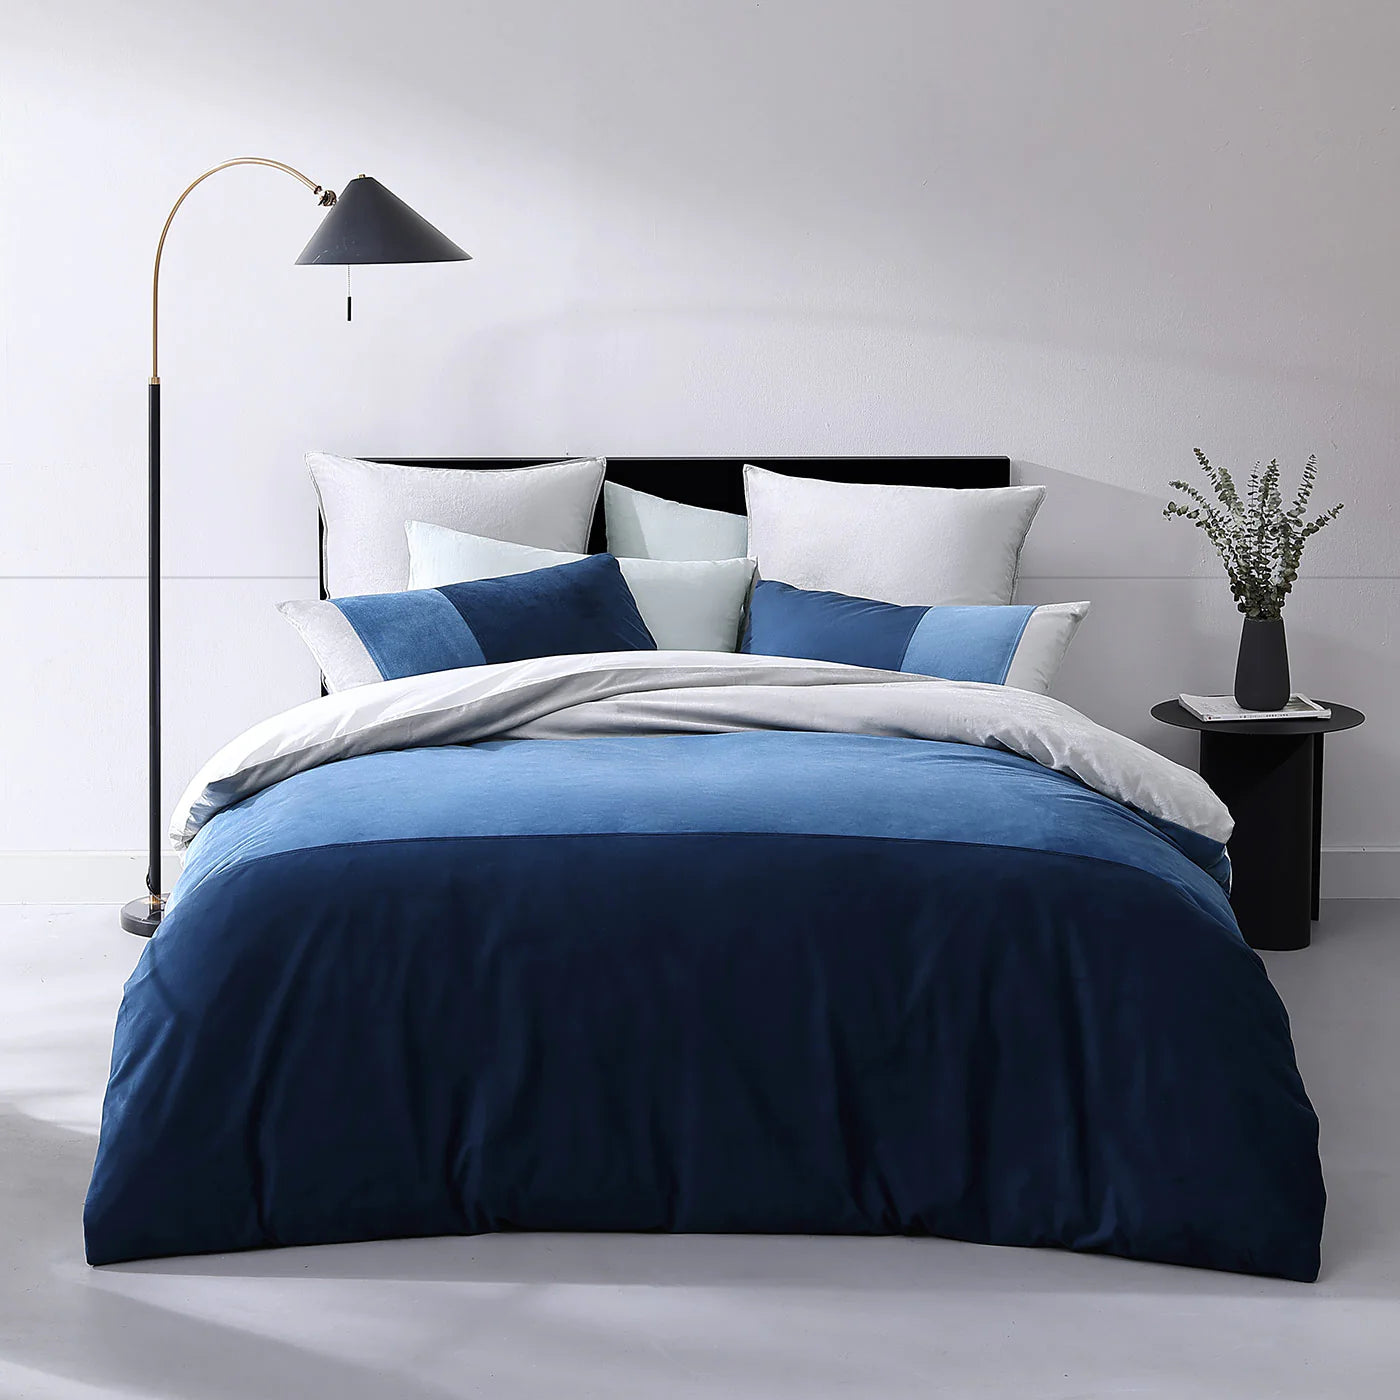 This Parker Blue Quilt Cover Set will have you feeling like royalty! With its ultra-plush velvet, its wide panels in navy, blue and silver will have you lounging in luxury